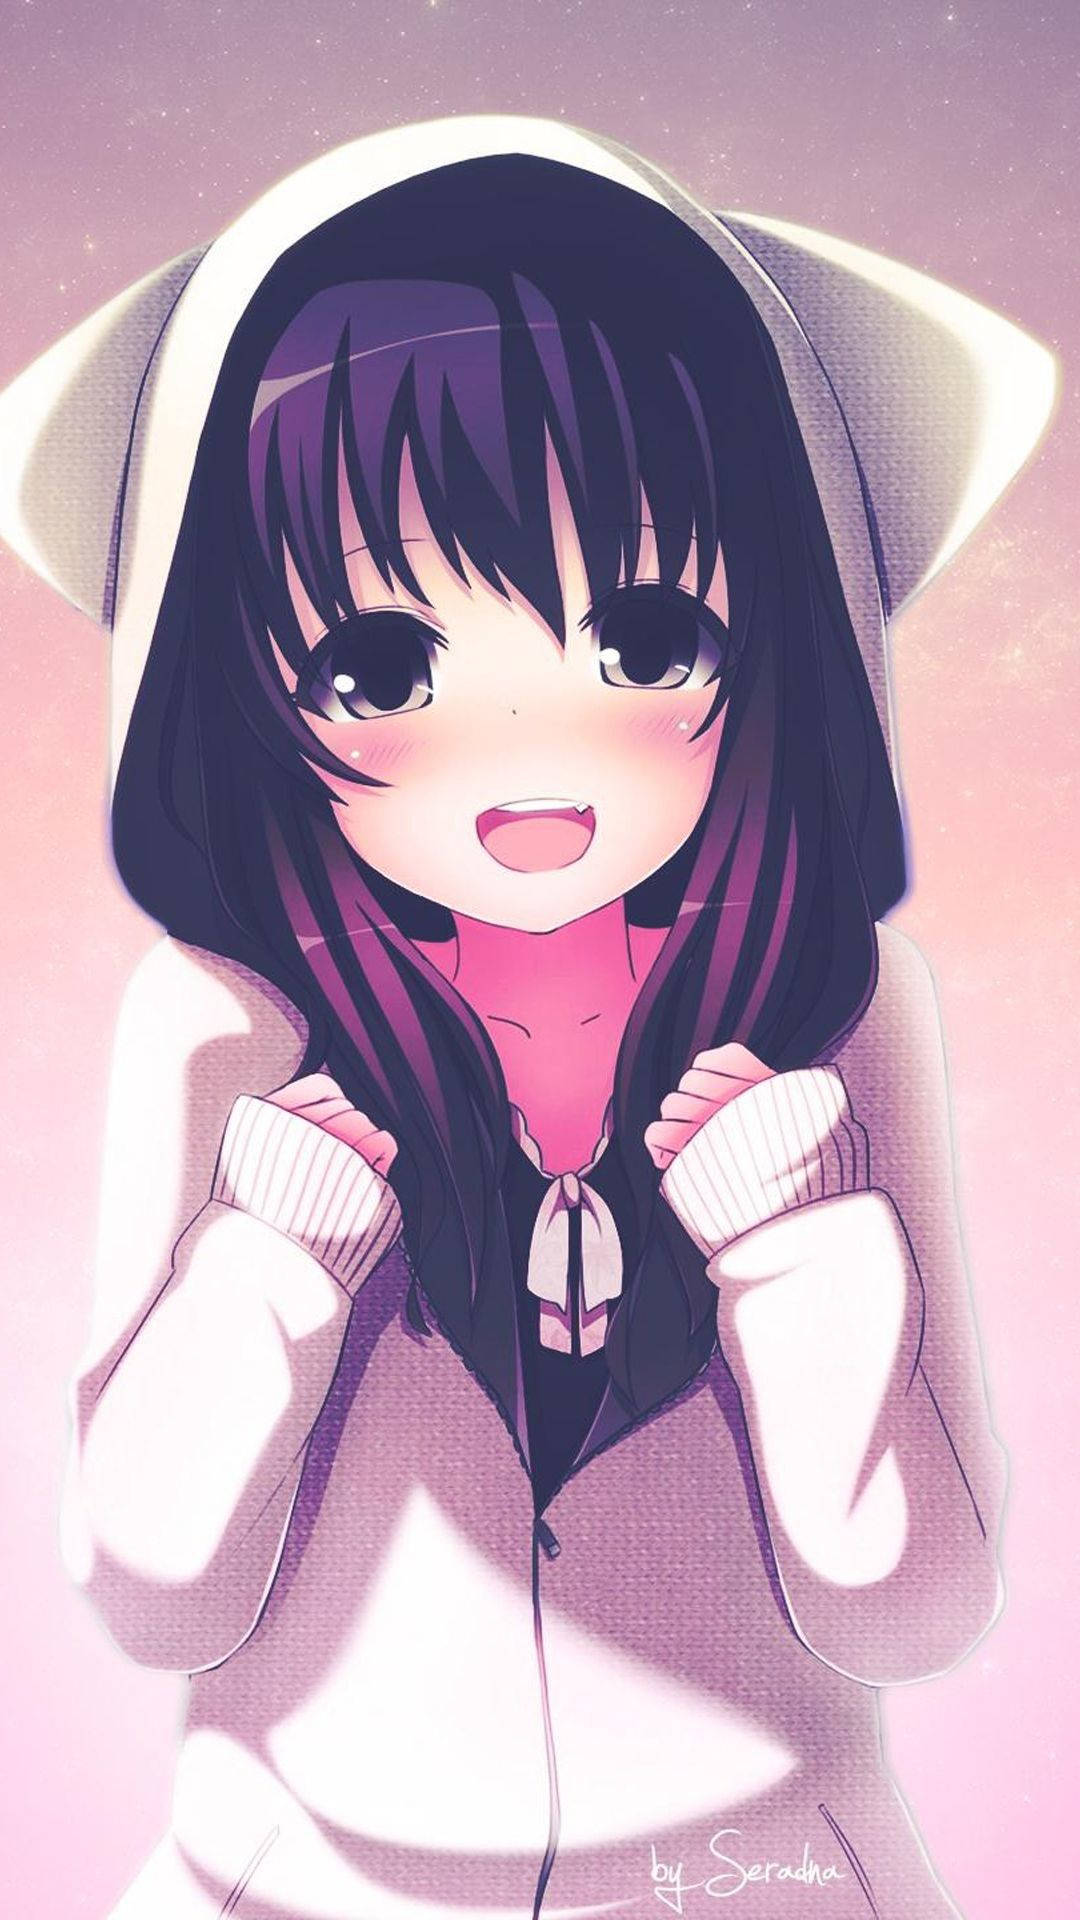 Cute Anime Girl iPhone Wallpaper for FREE